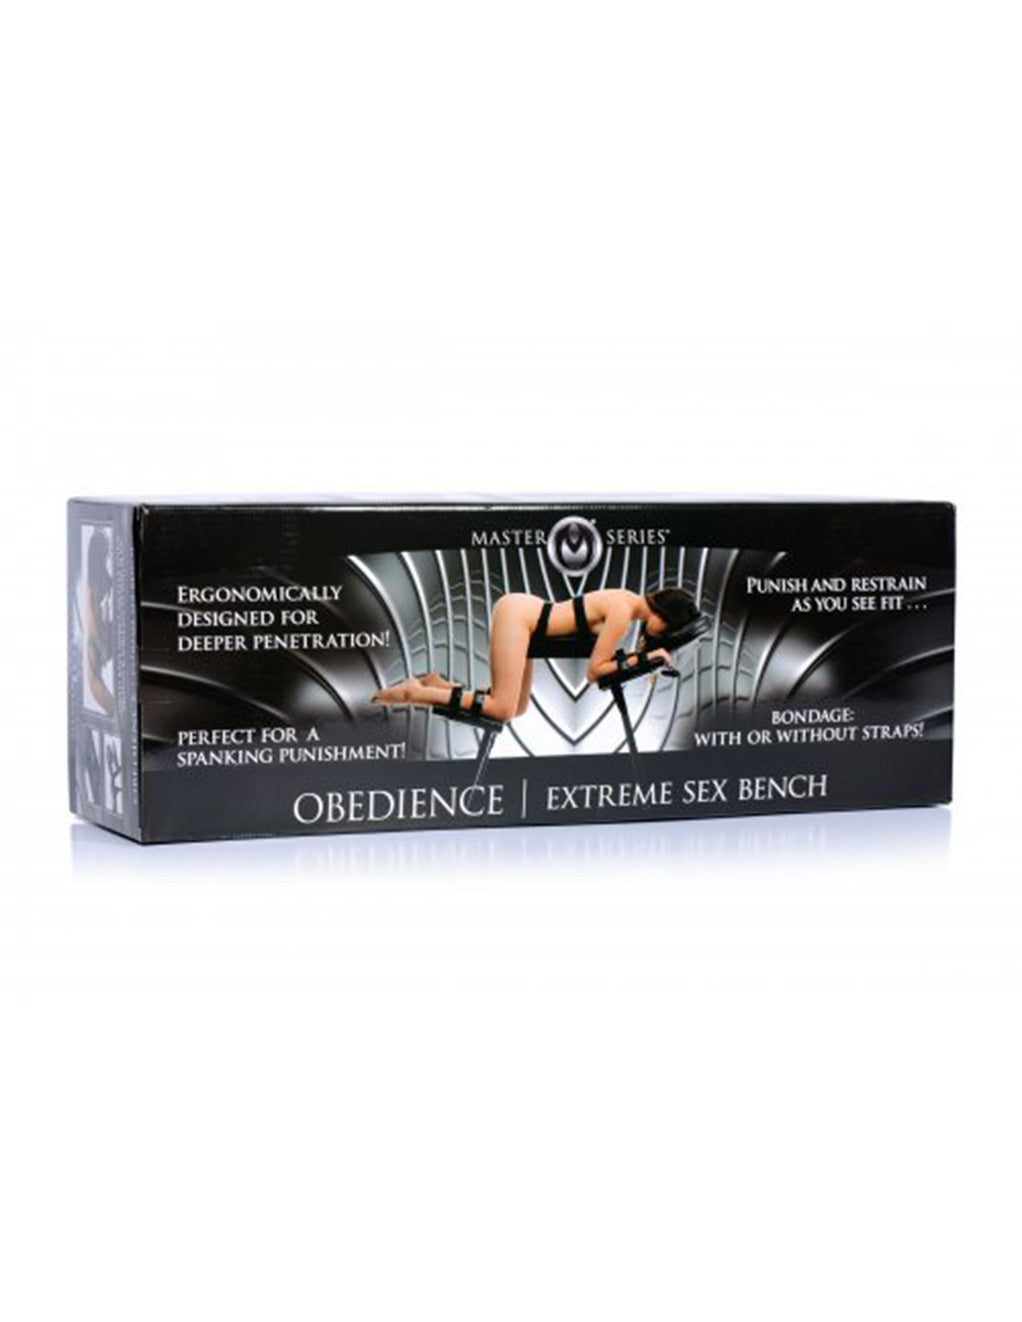 Obedience Extreme Sex Bench- Box